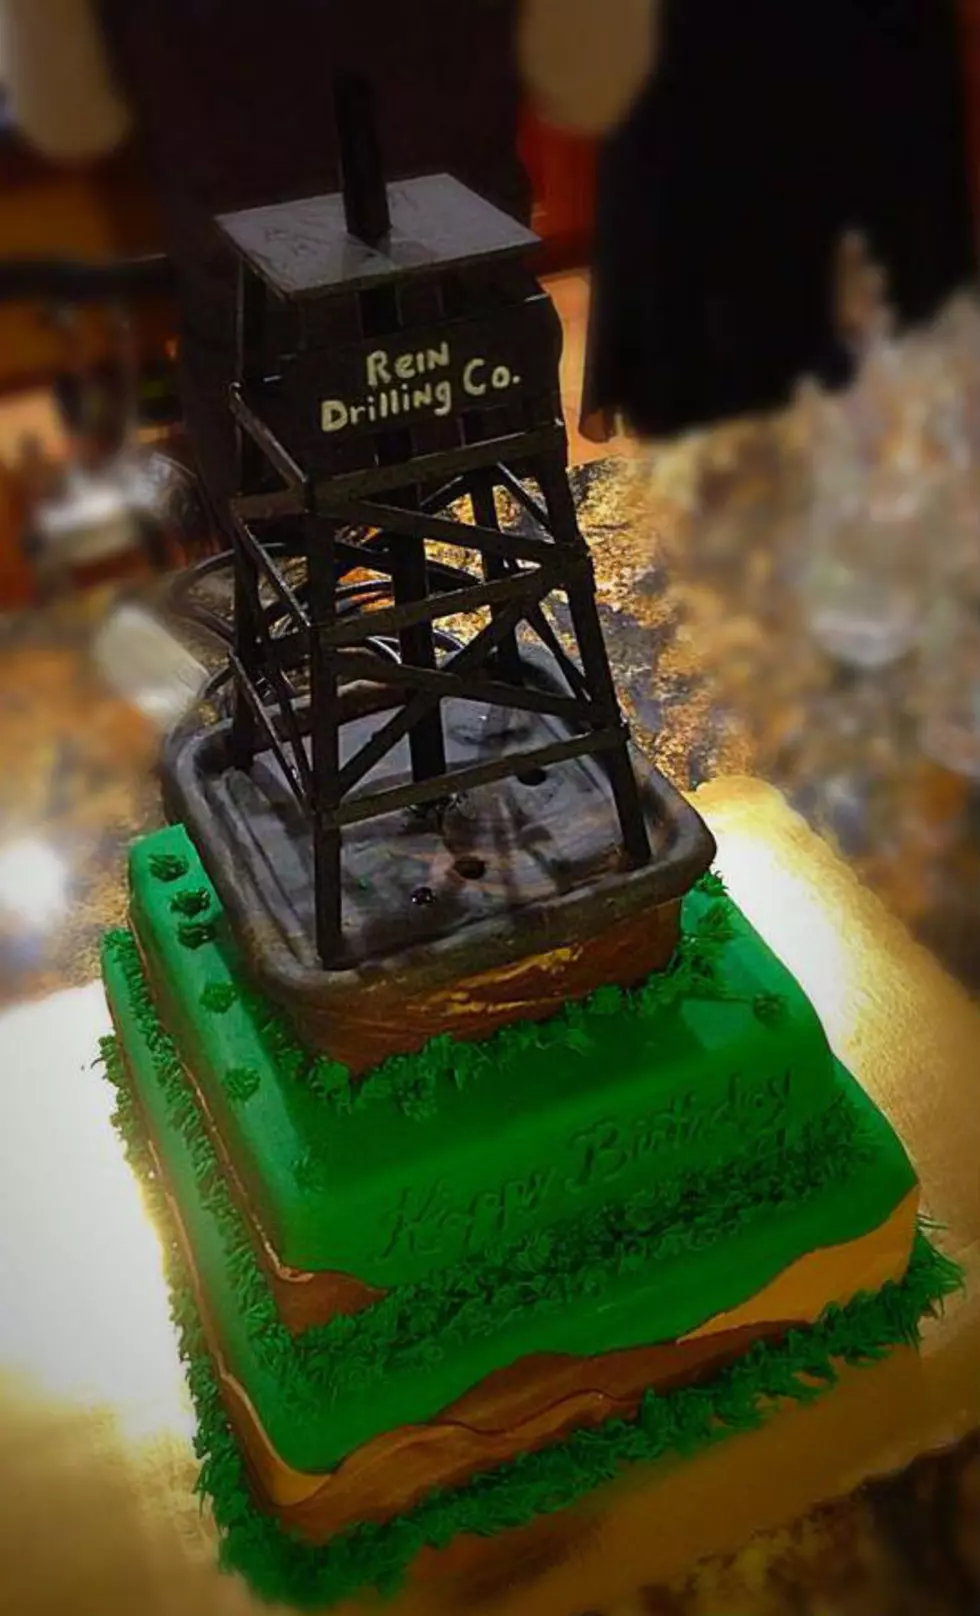 Wyoming Baker Strikes Gold With Awesome Oil Rig Cake (Video)